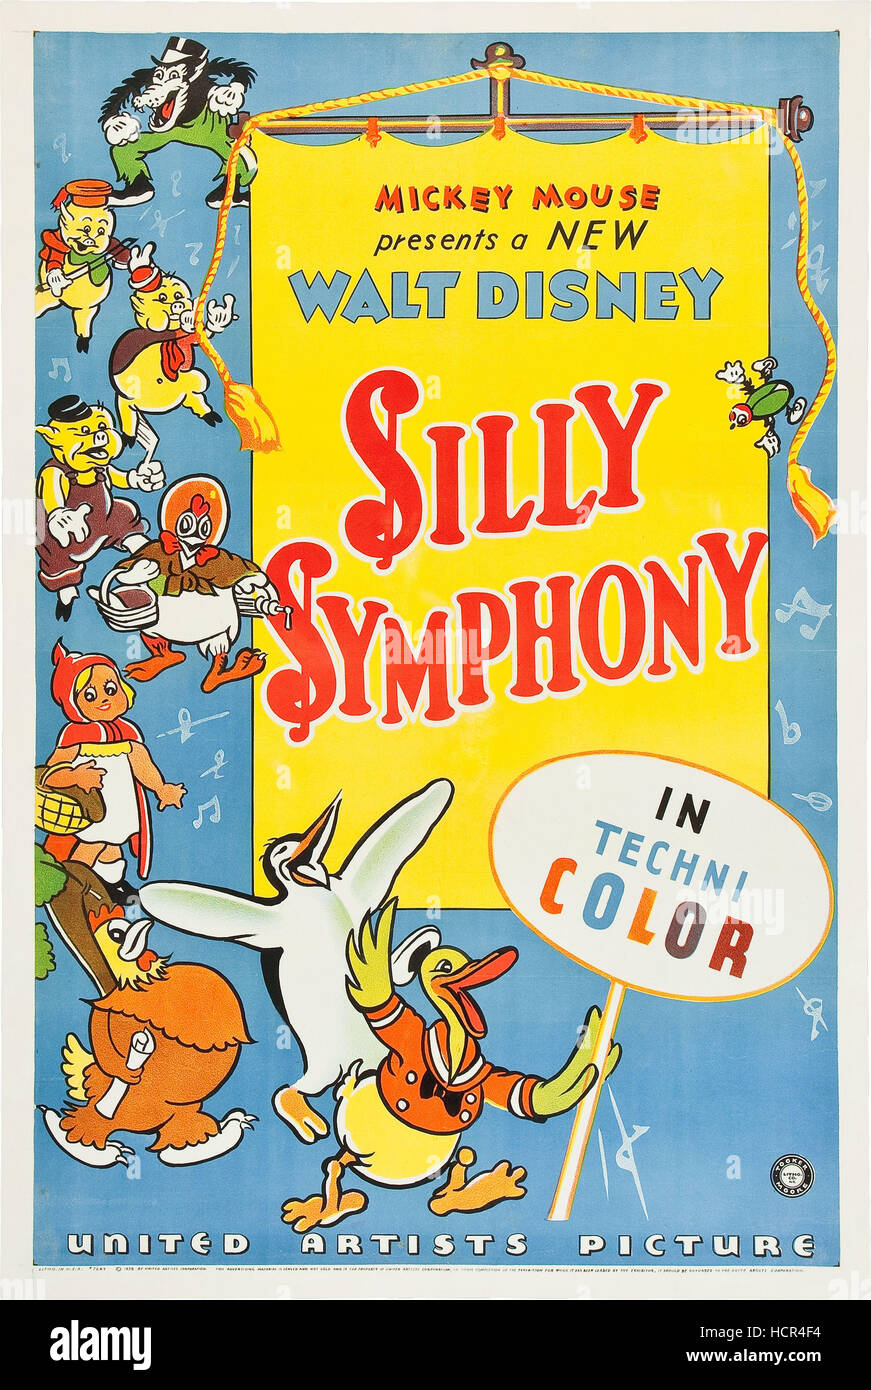 SILLY SYMPHONY, from top left: Big Bad Wolf, Three Little Pigs, Henny Penny, Little Red Riding Hood, chicken, penguin, Donald Stock Photo